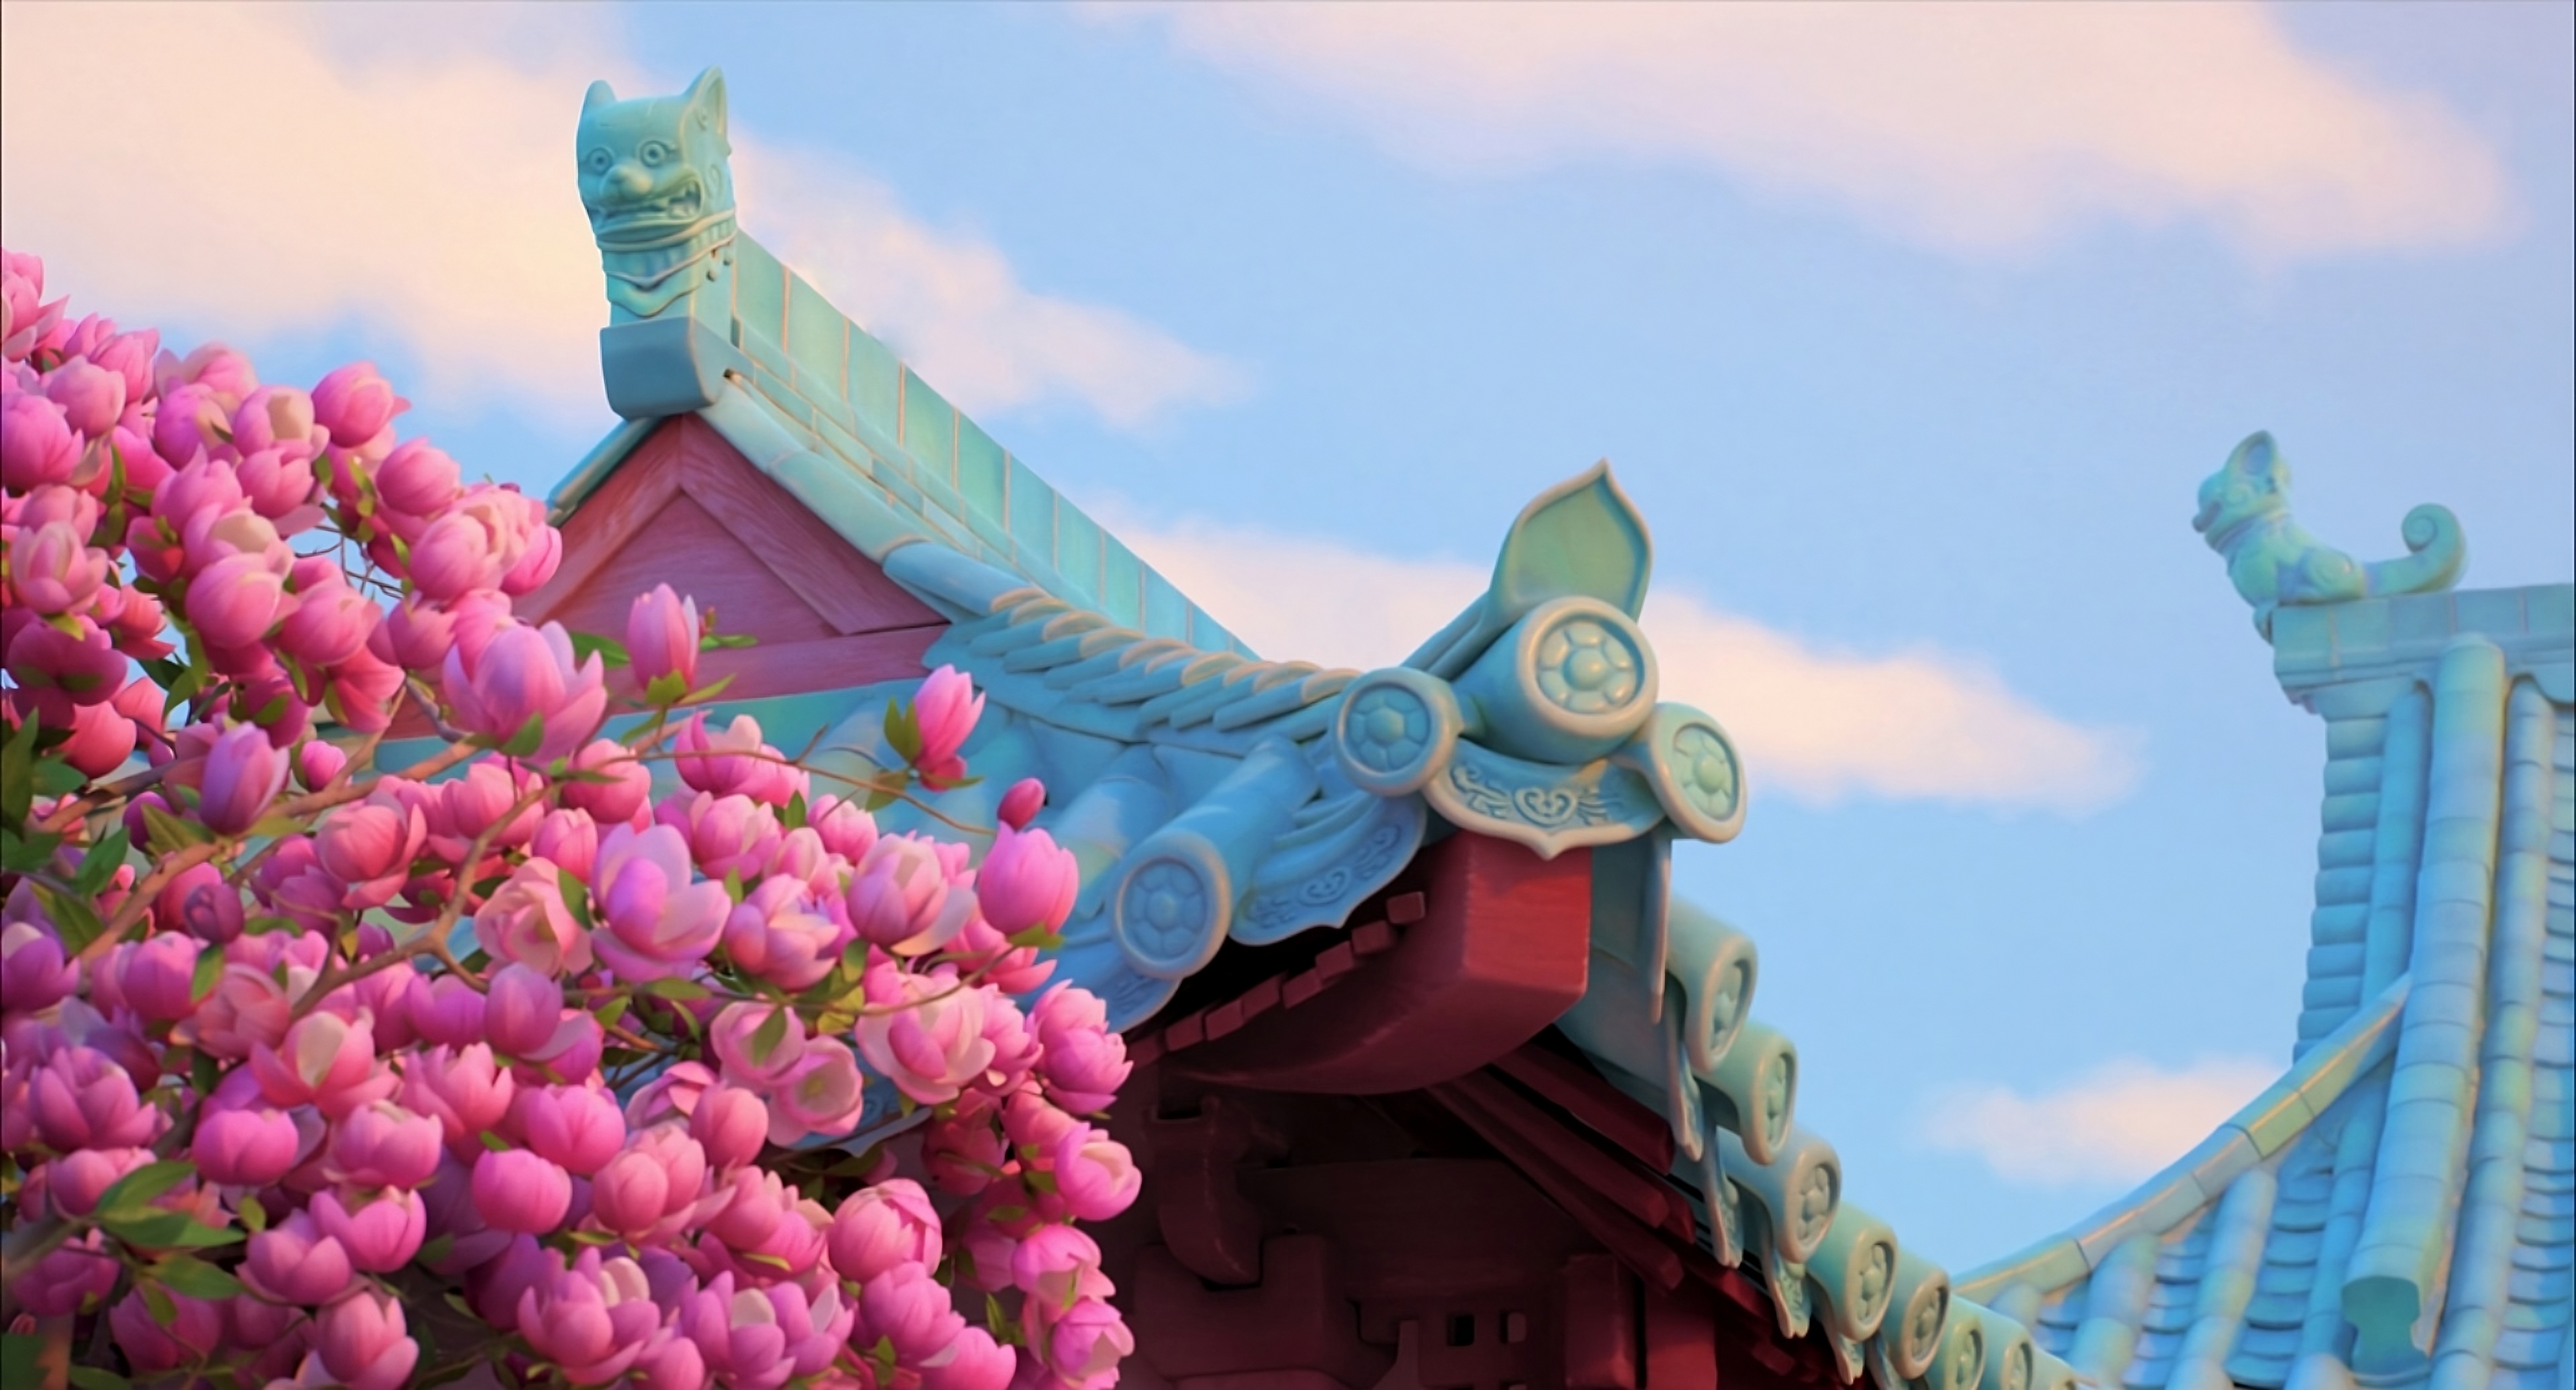 General 3840x2072 turning red Pixar Animation Studios Chinese architecture animation cherry blossom red panda